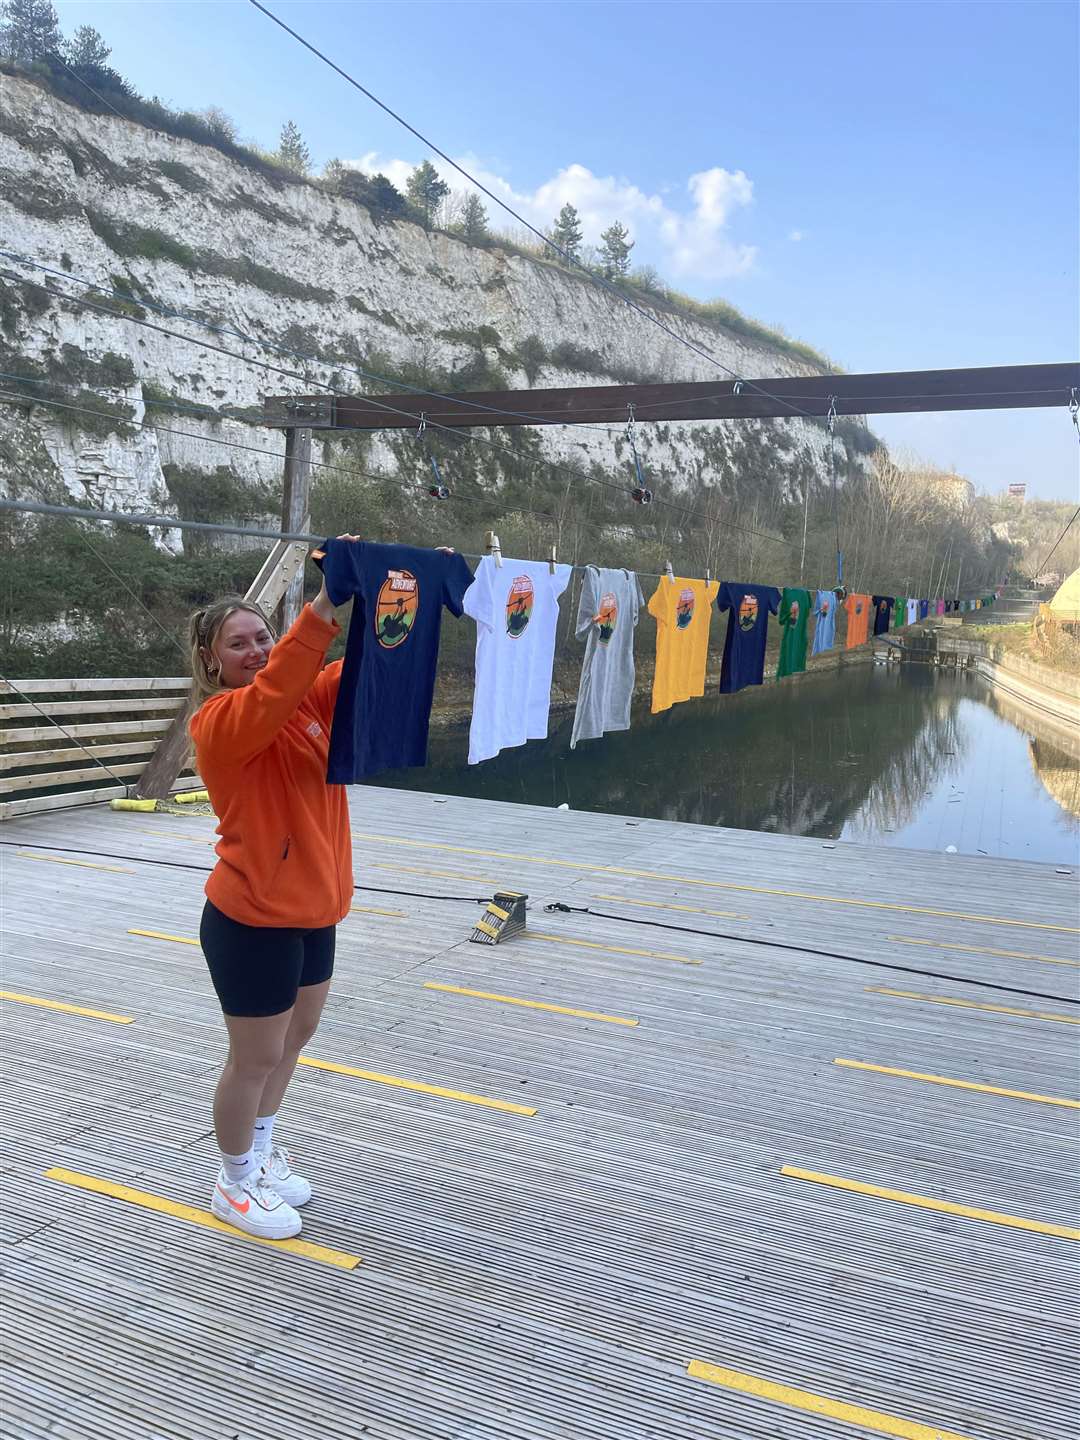 Alison Fogall-Hooper, apparently pegging the final T-shirts on the 'record breaking washing line', on the morning of April Fool's Day